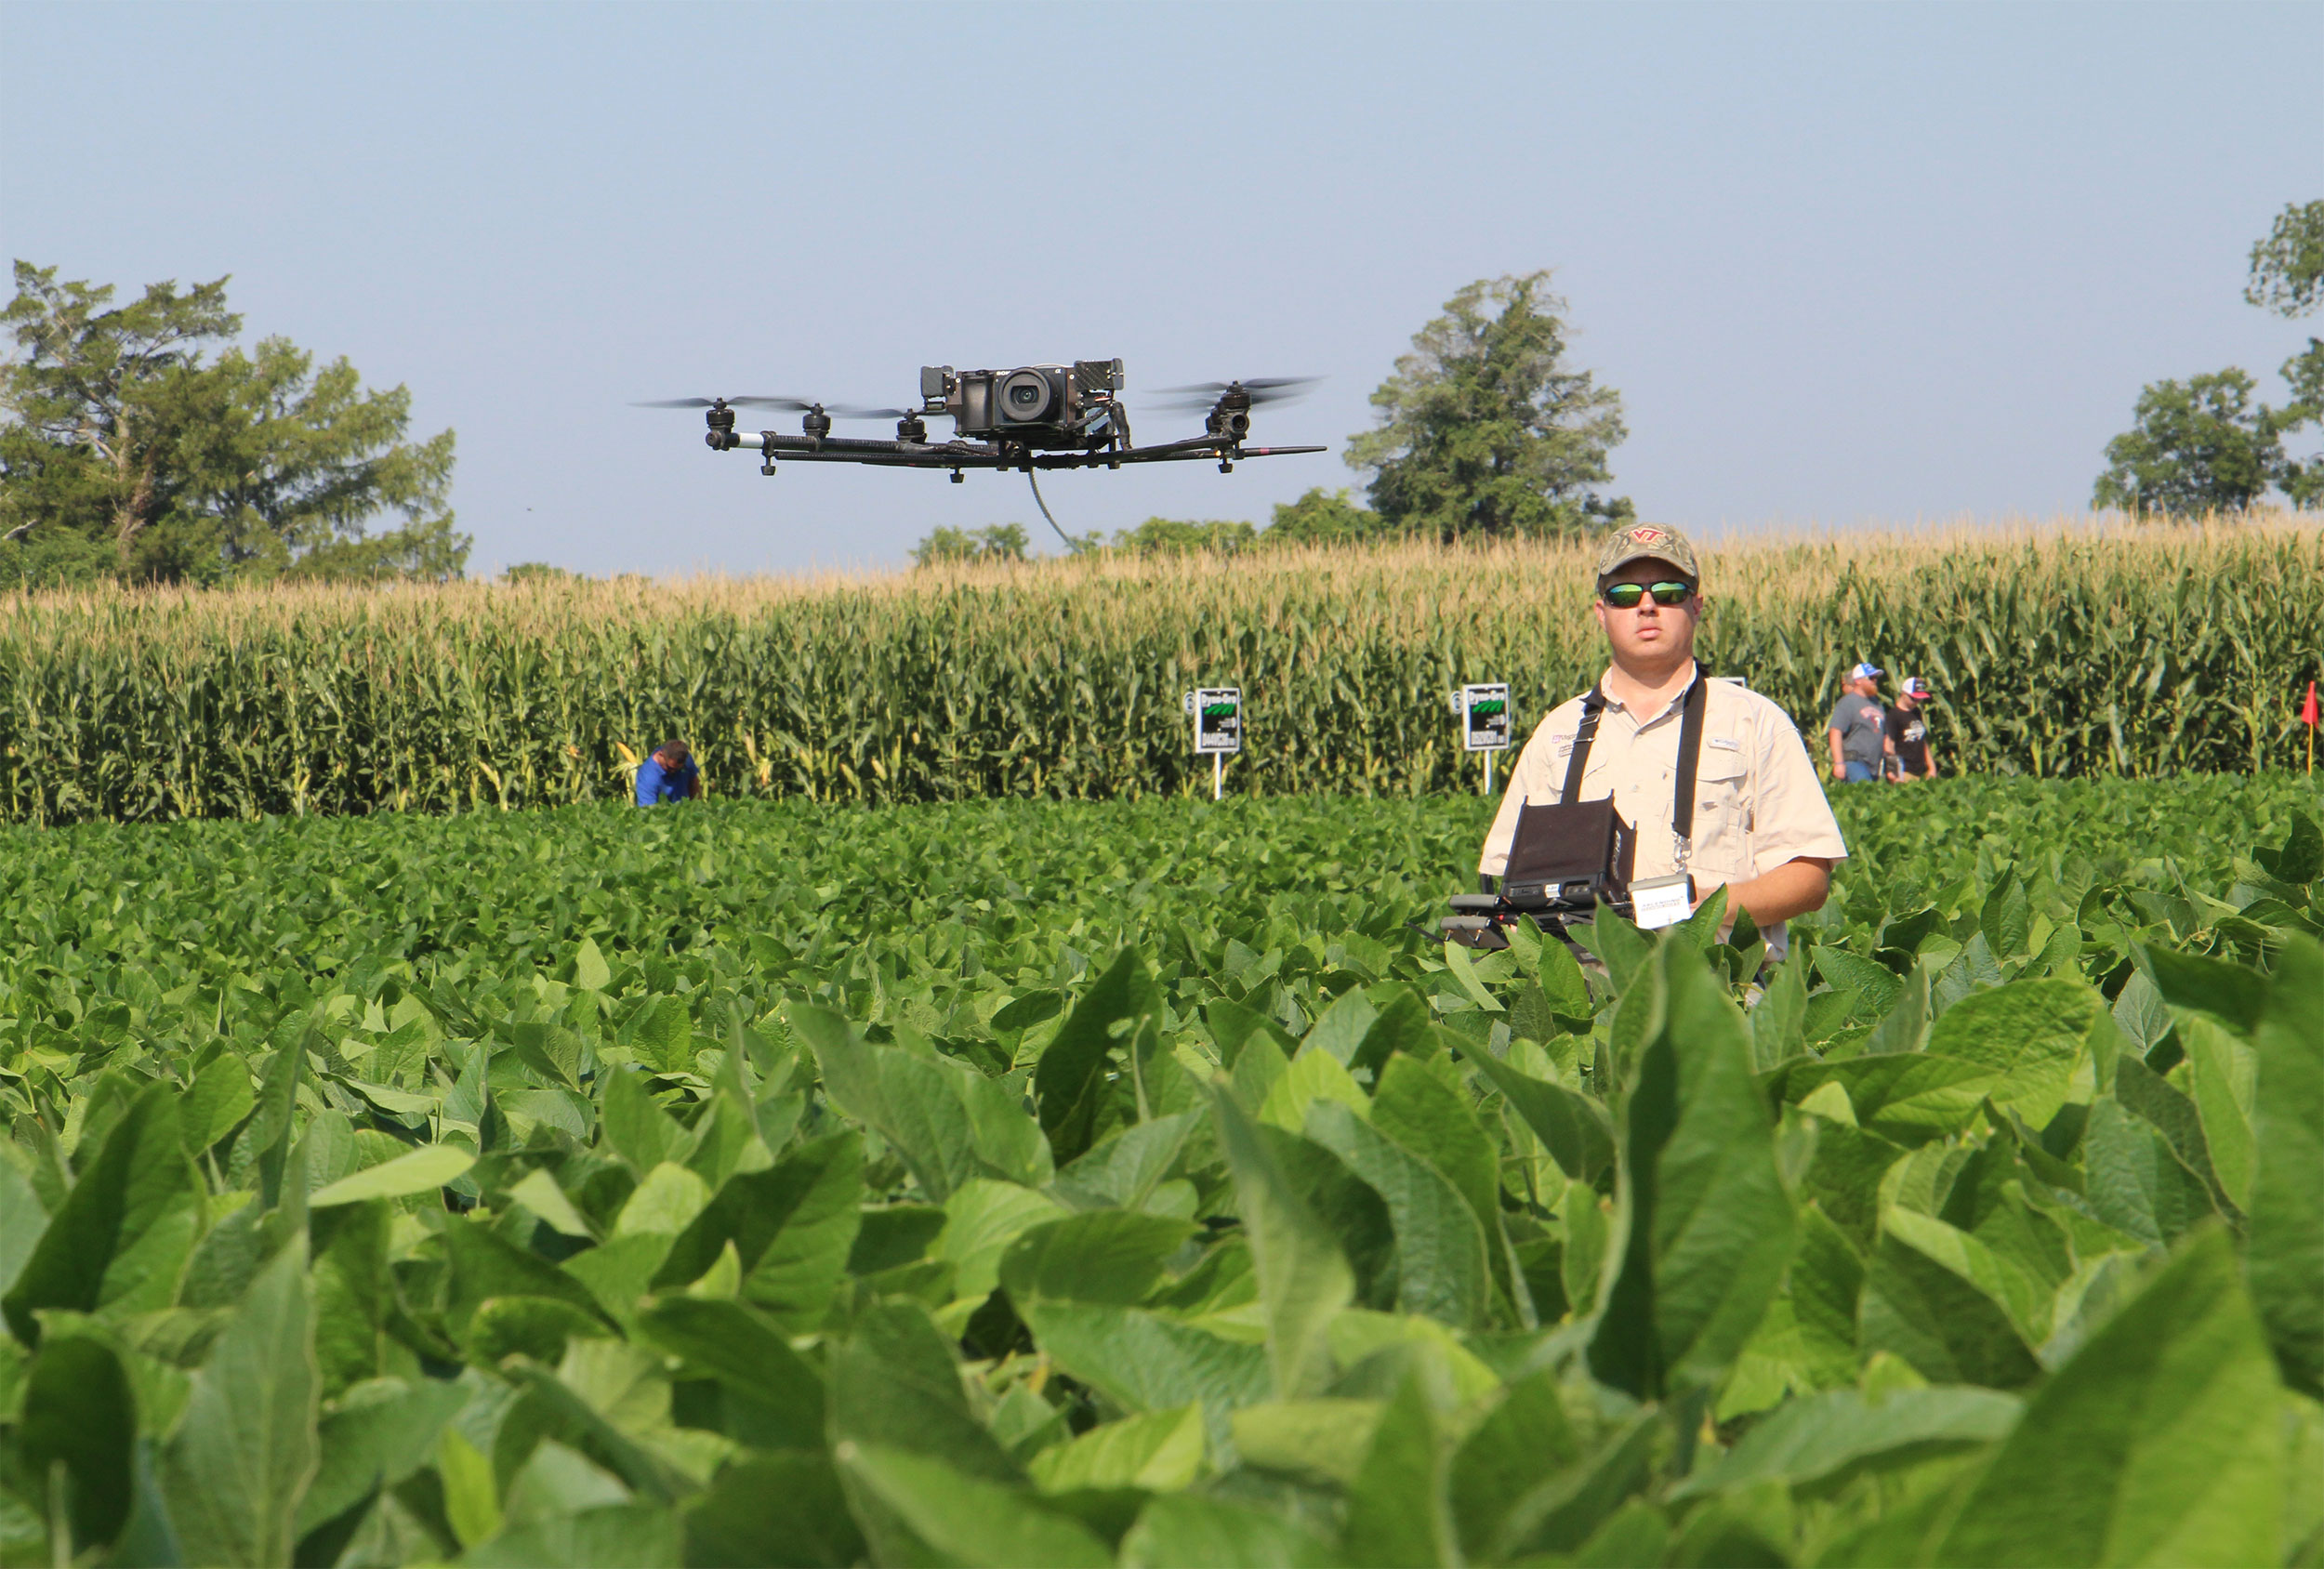 Researchers at Agricultural Research and Extension Centers around the state are investigating how cutting-edge technology tools such as drones can be used by producers to streamline their operations.